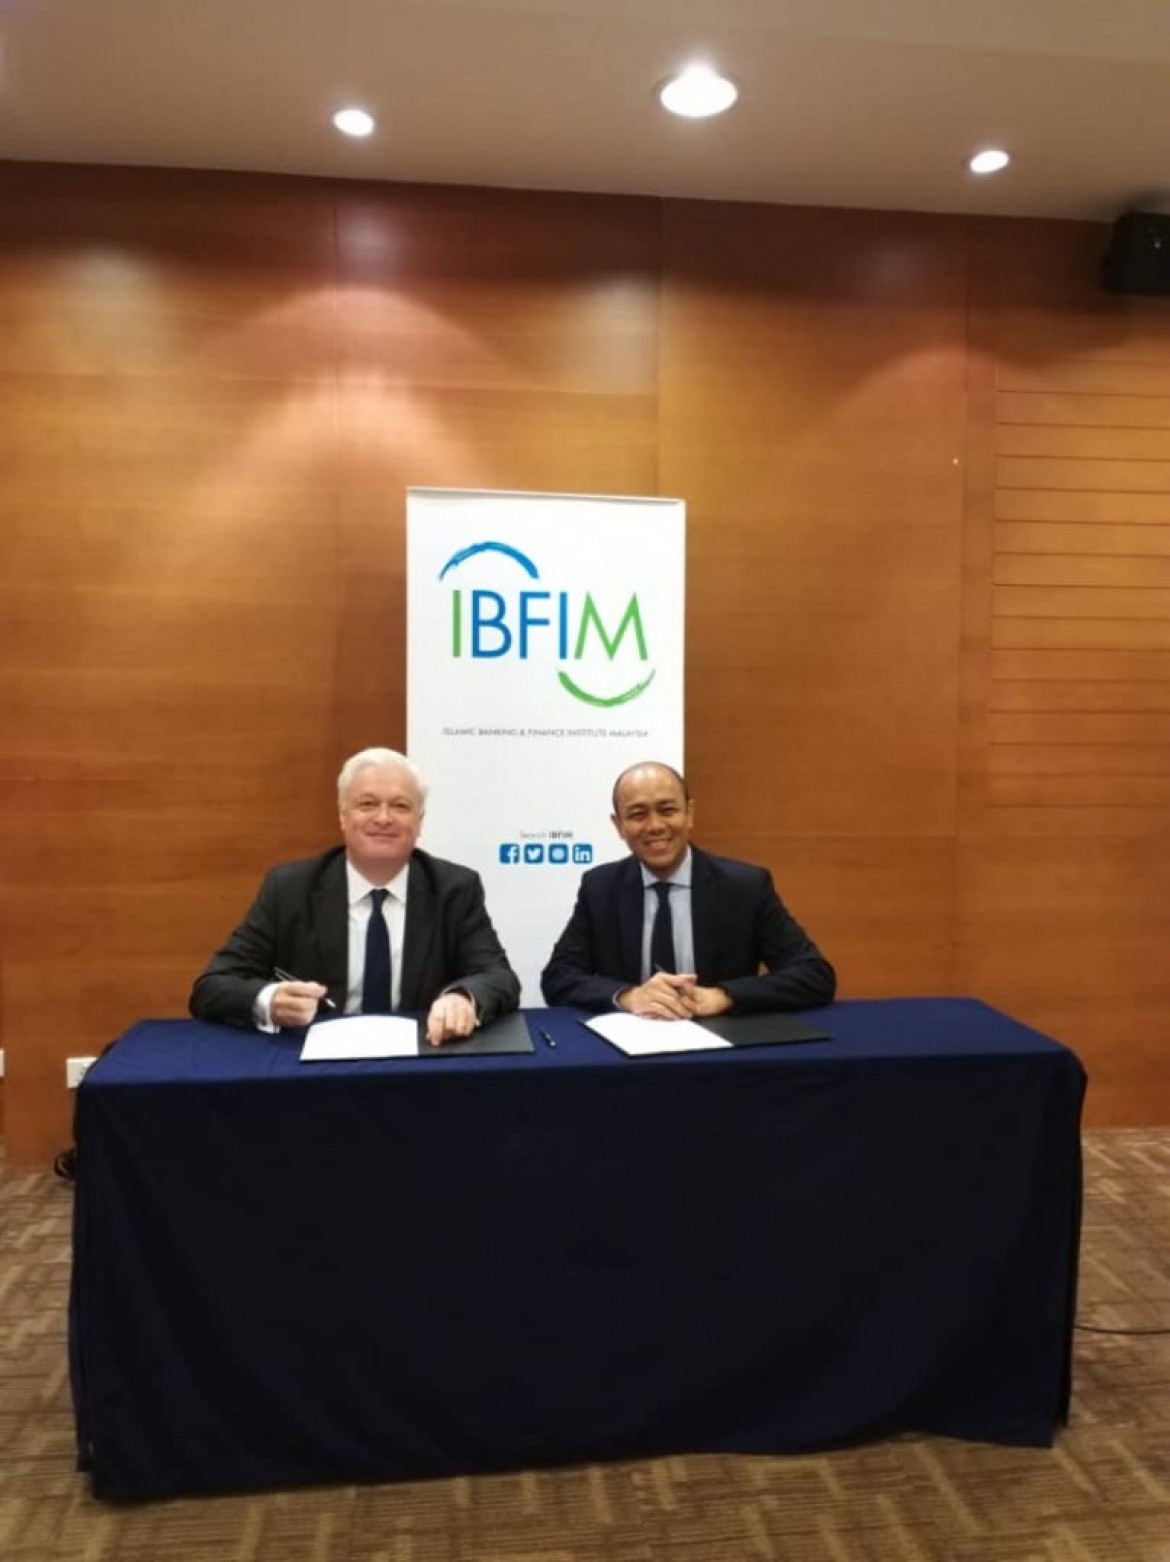 RECOGNITION OF IBFIM’S QUALIFICATION BY CISI